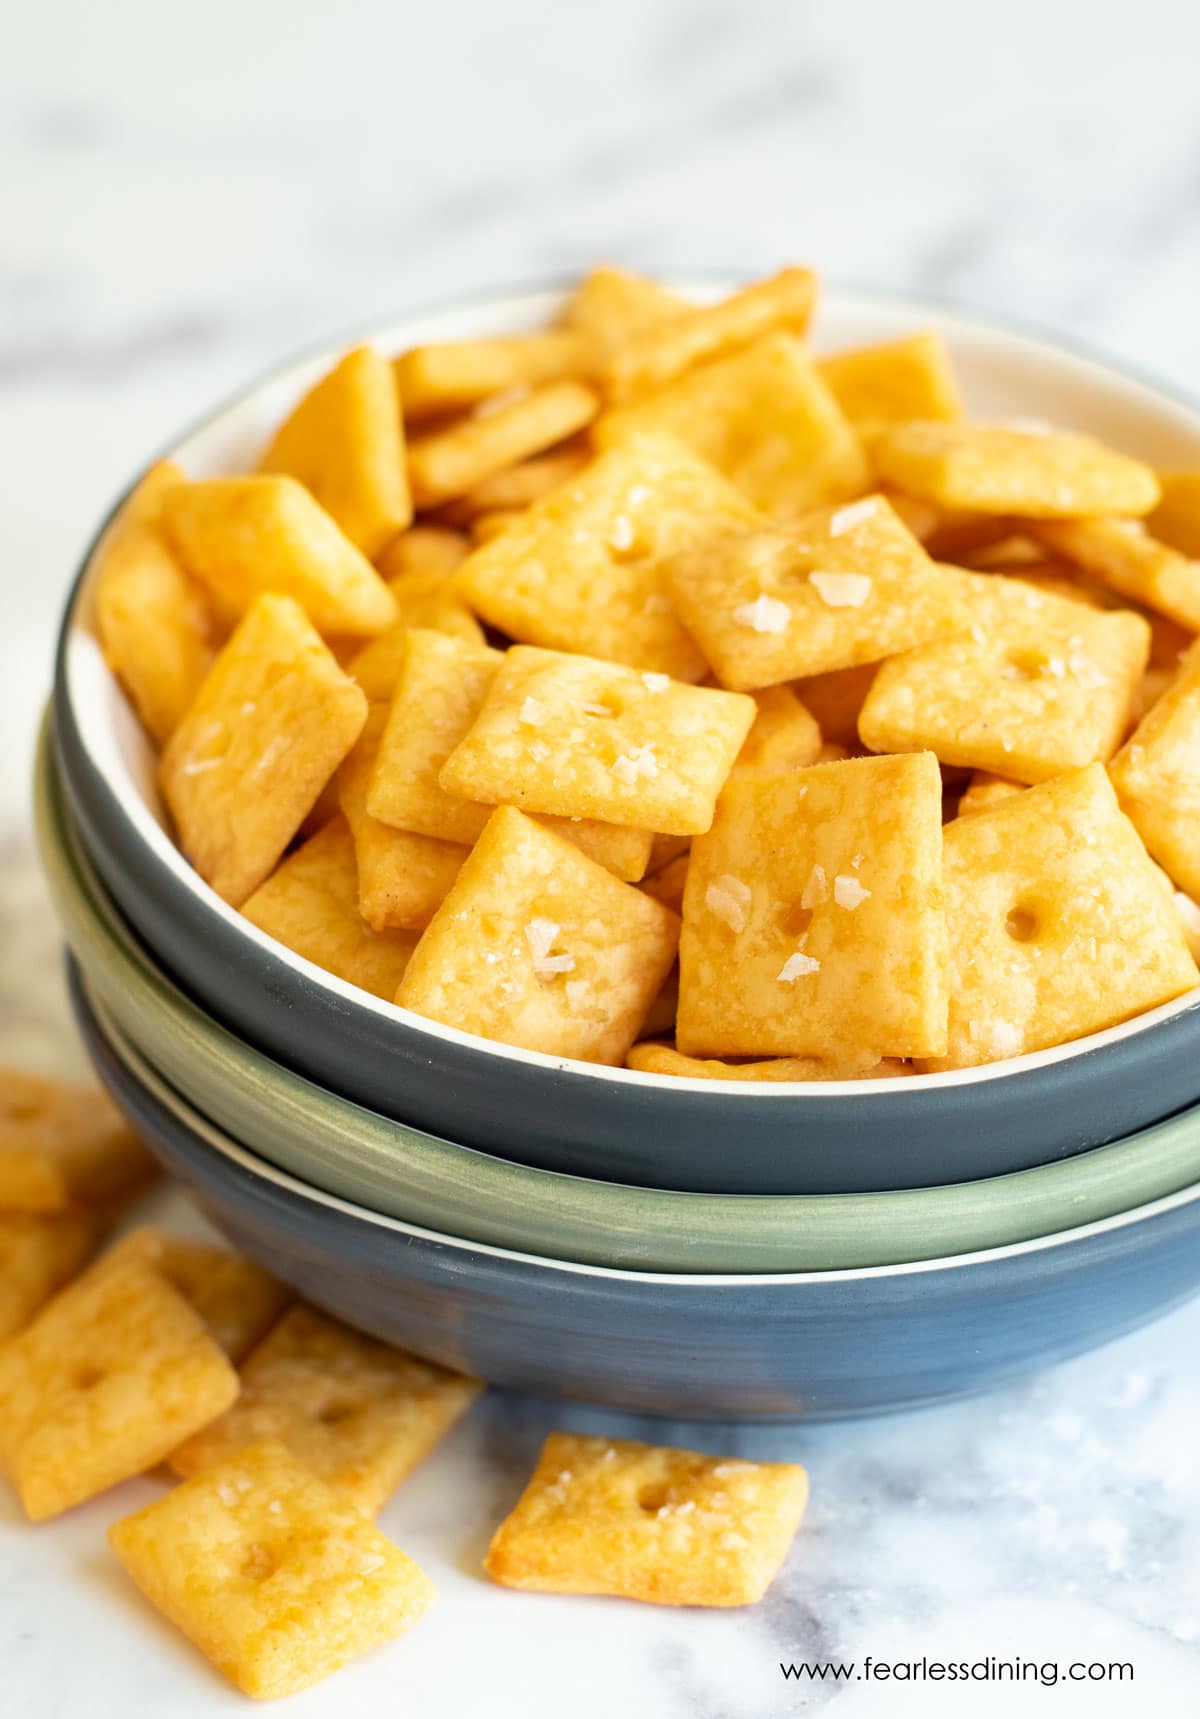 A blue bowl filled with gluten free cheez its on the counter.